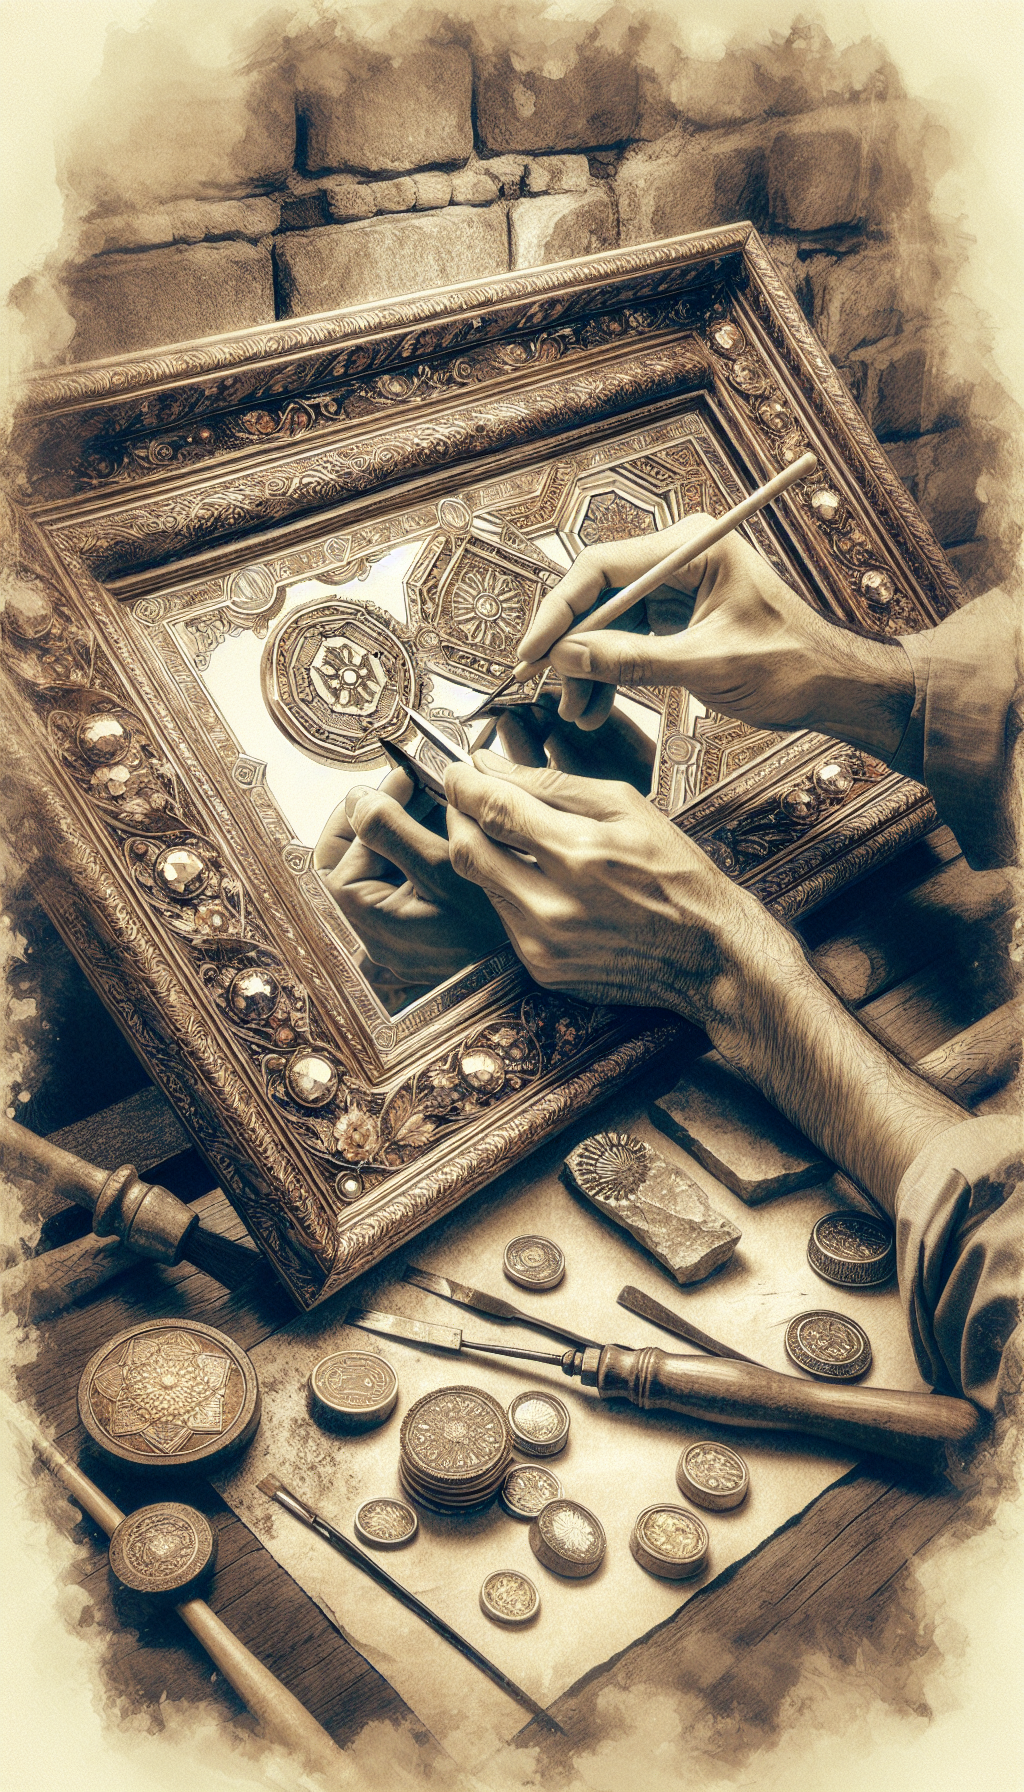 An illustration depicting an artisan's hands delicately etching intricate details onto the frame of an ornate antique mirror, with the mirror surface reflecting symbols of value - such as rare gems and golden coins - blending with tools of the trade like a chisel and brush. The artwork utilizes a sepia-toned watercolor style to evoke the timelessness and elegance of the antique.